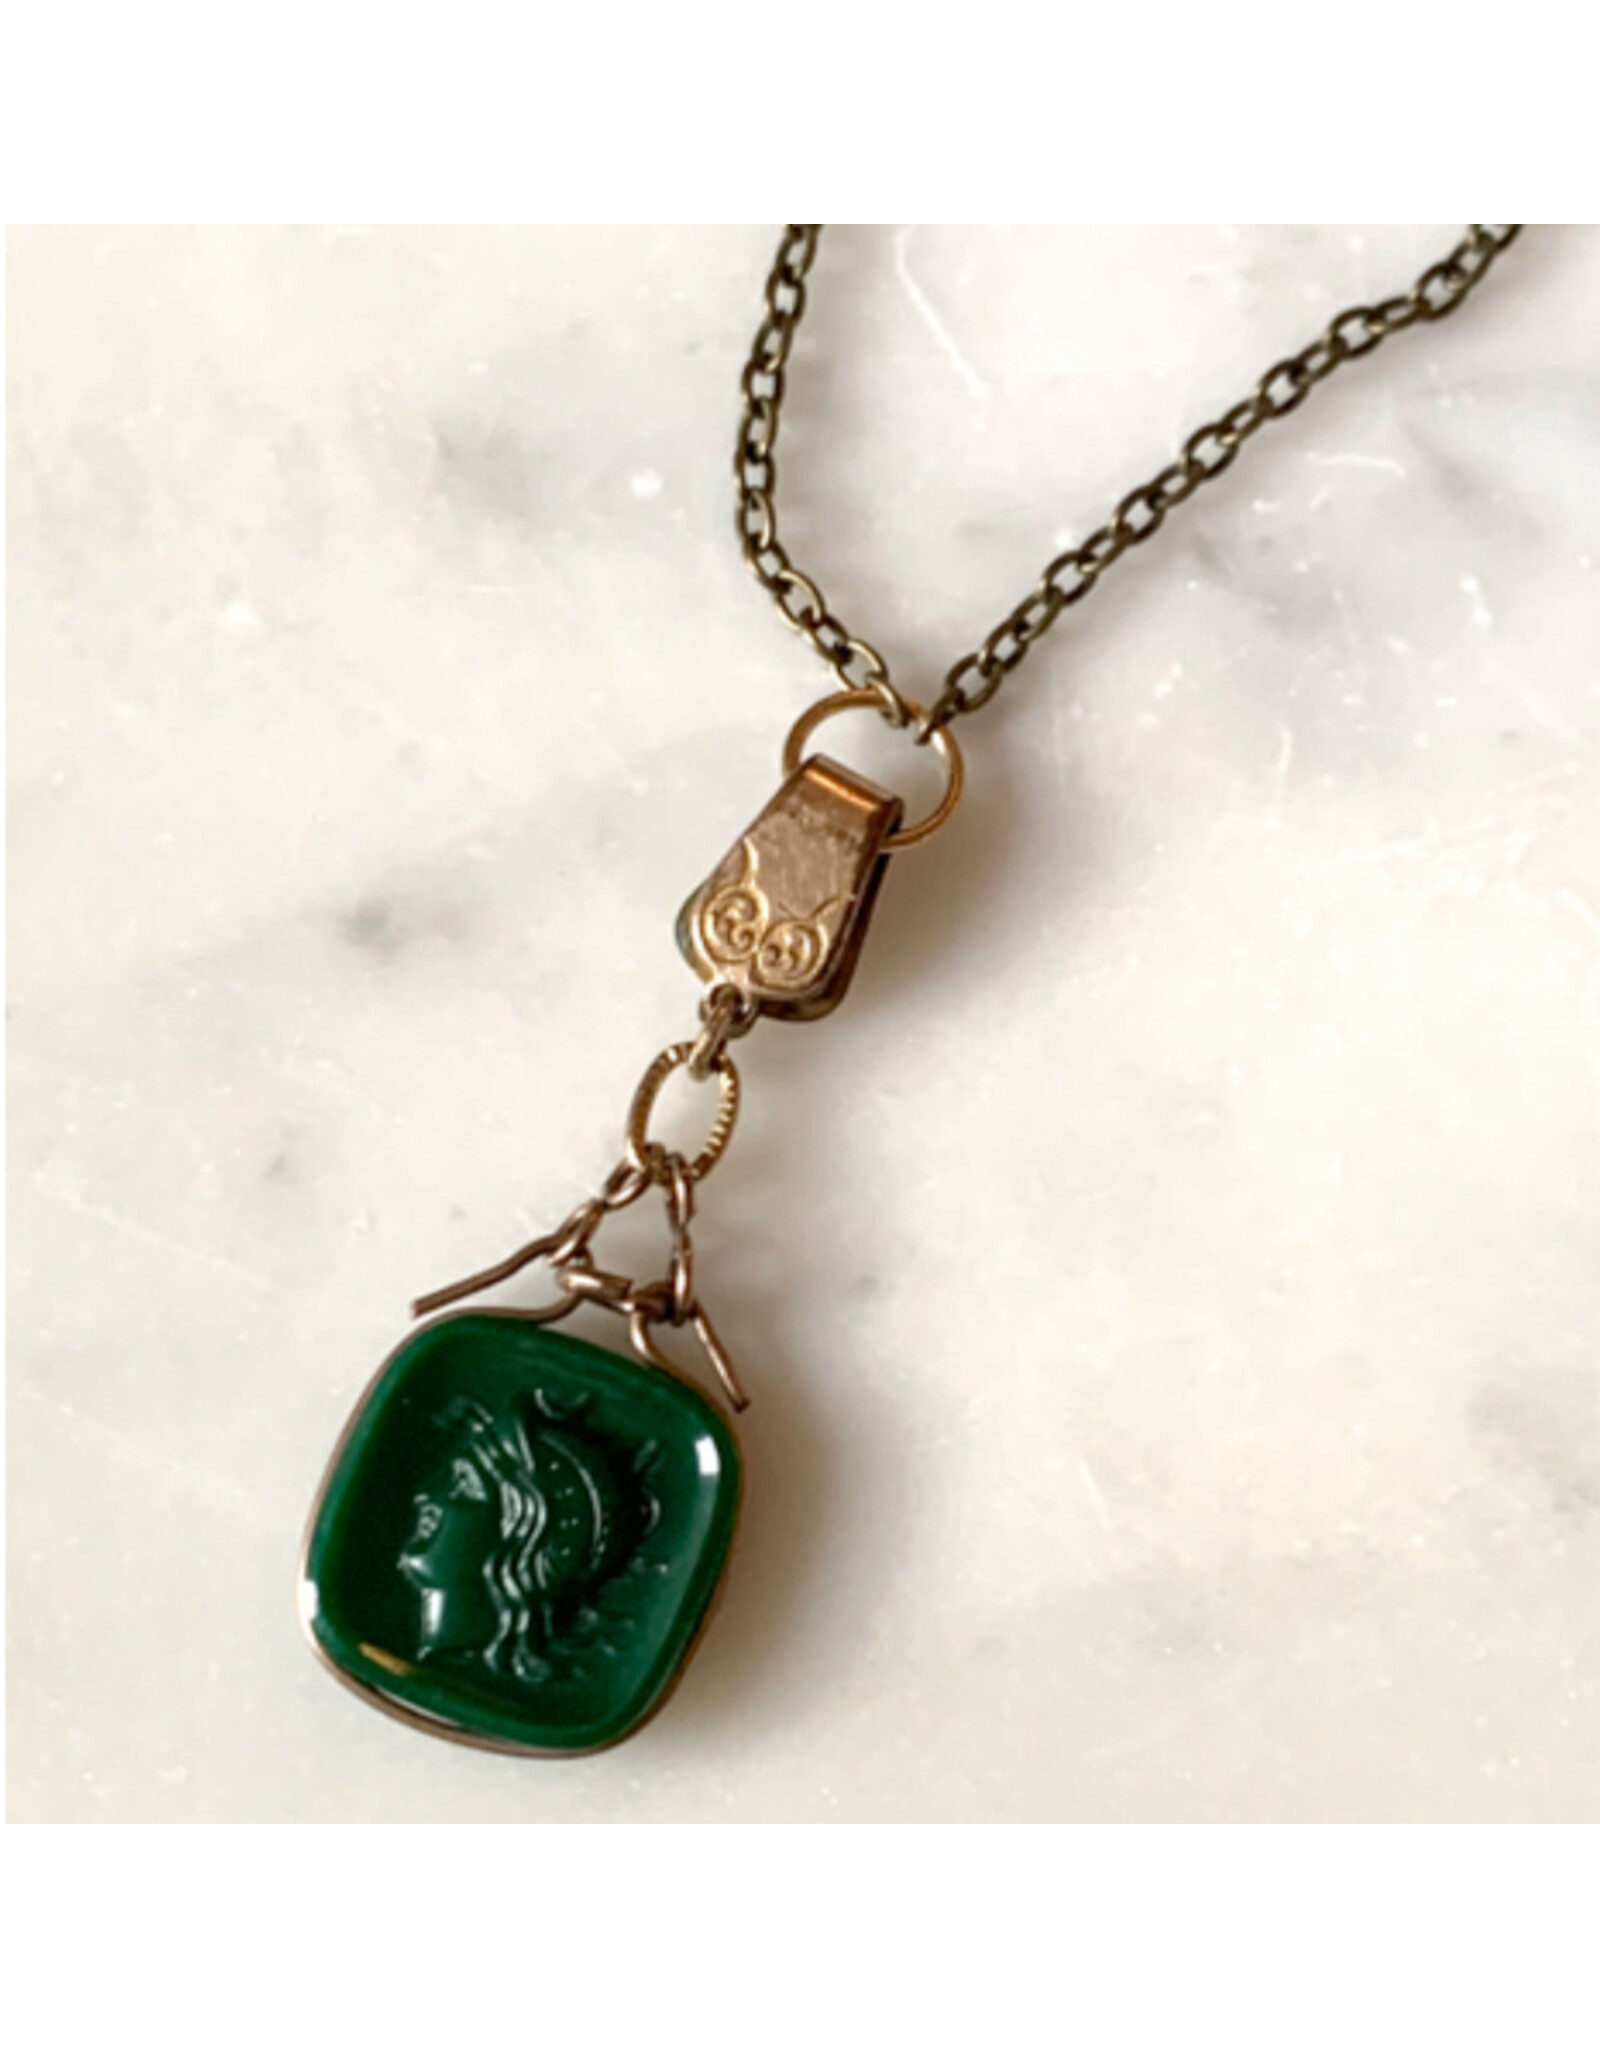 Victorian Agate Warrior Fob Necklace